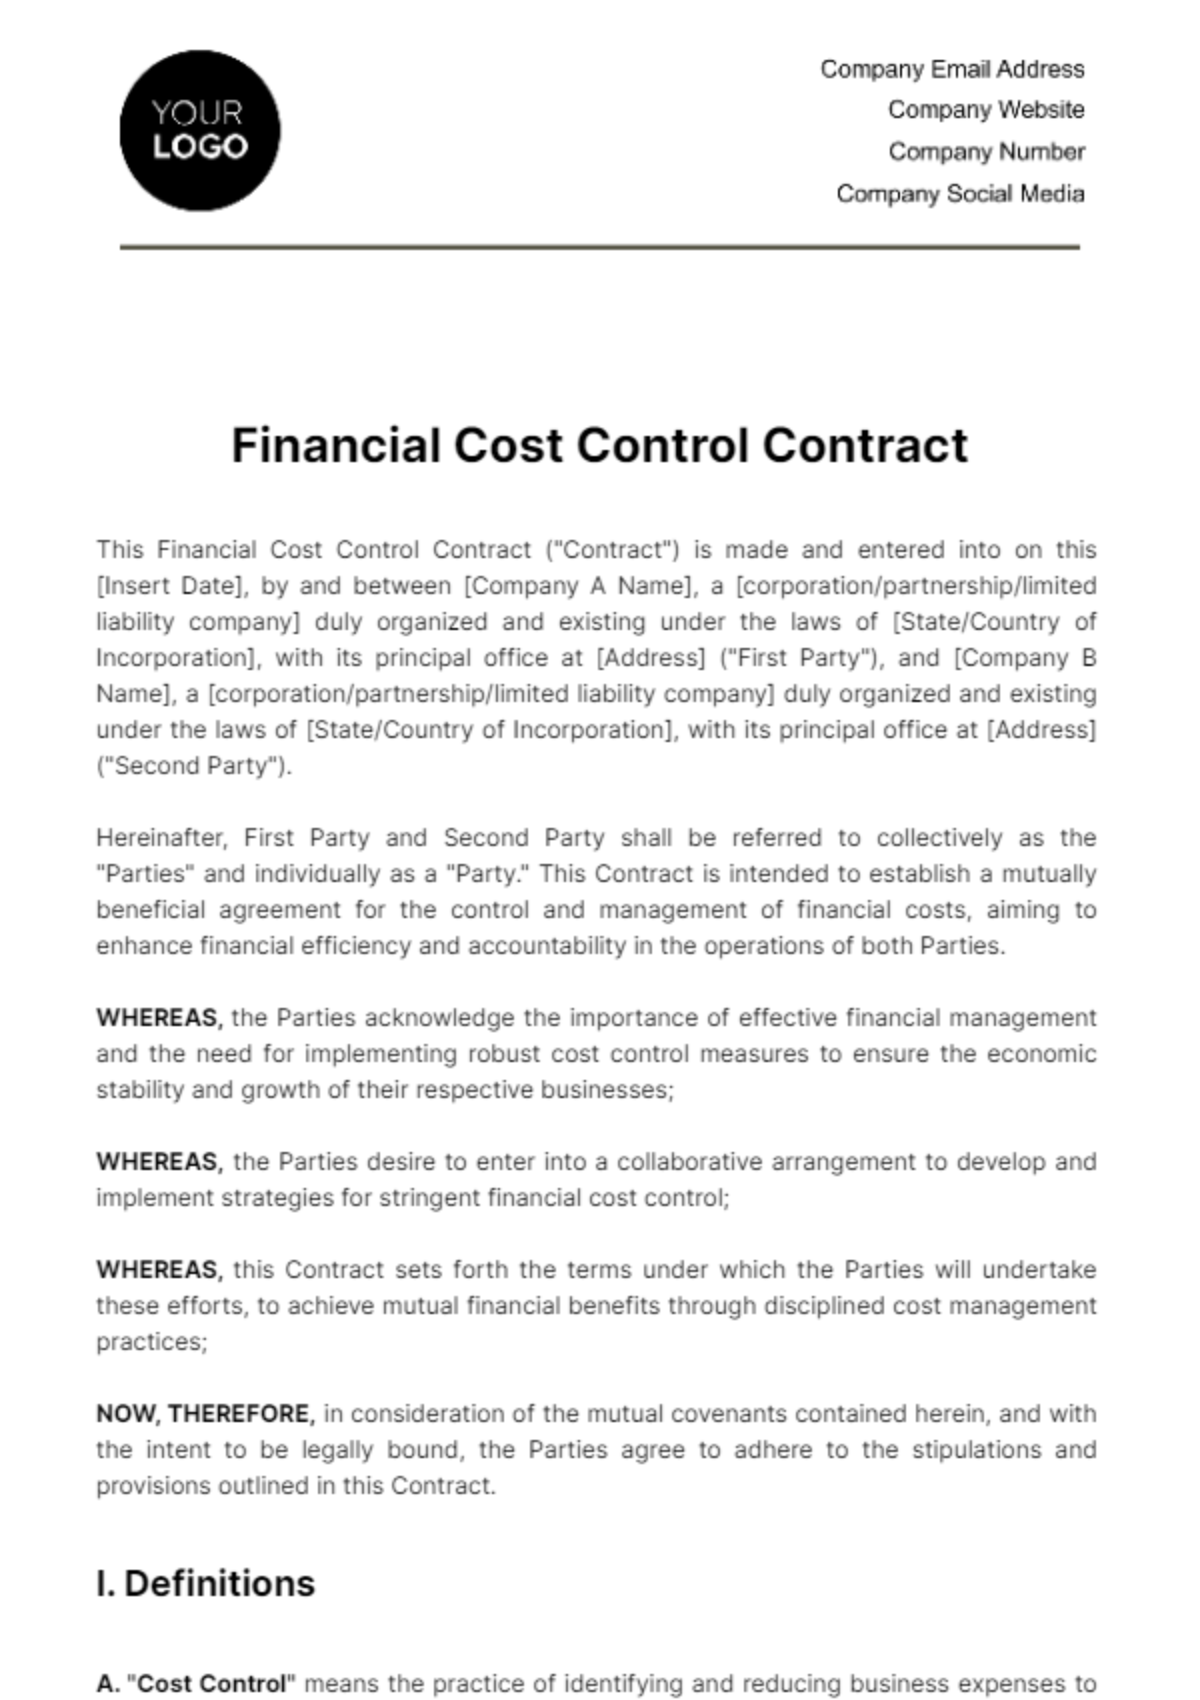 Financial Cost Control Contract Template